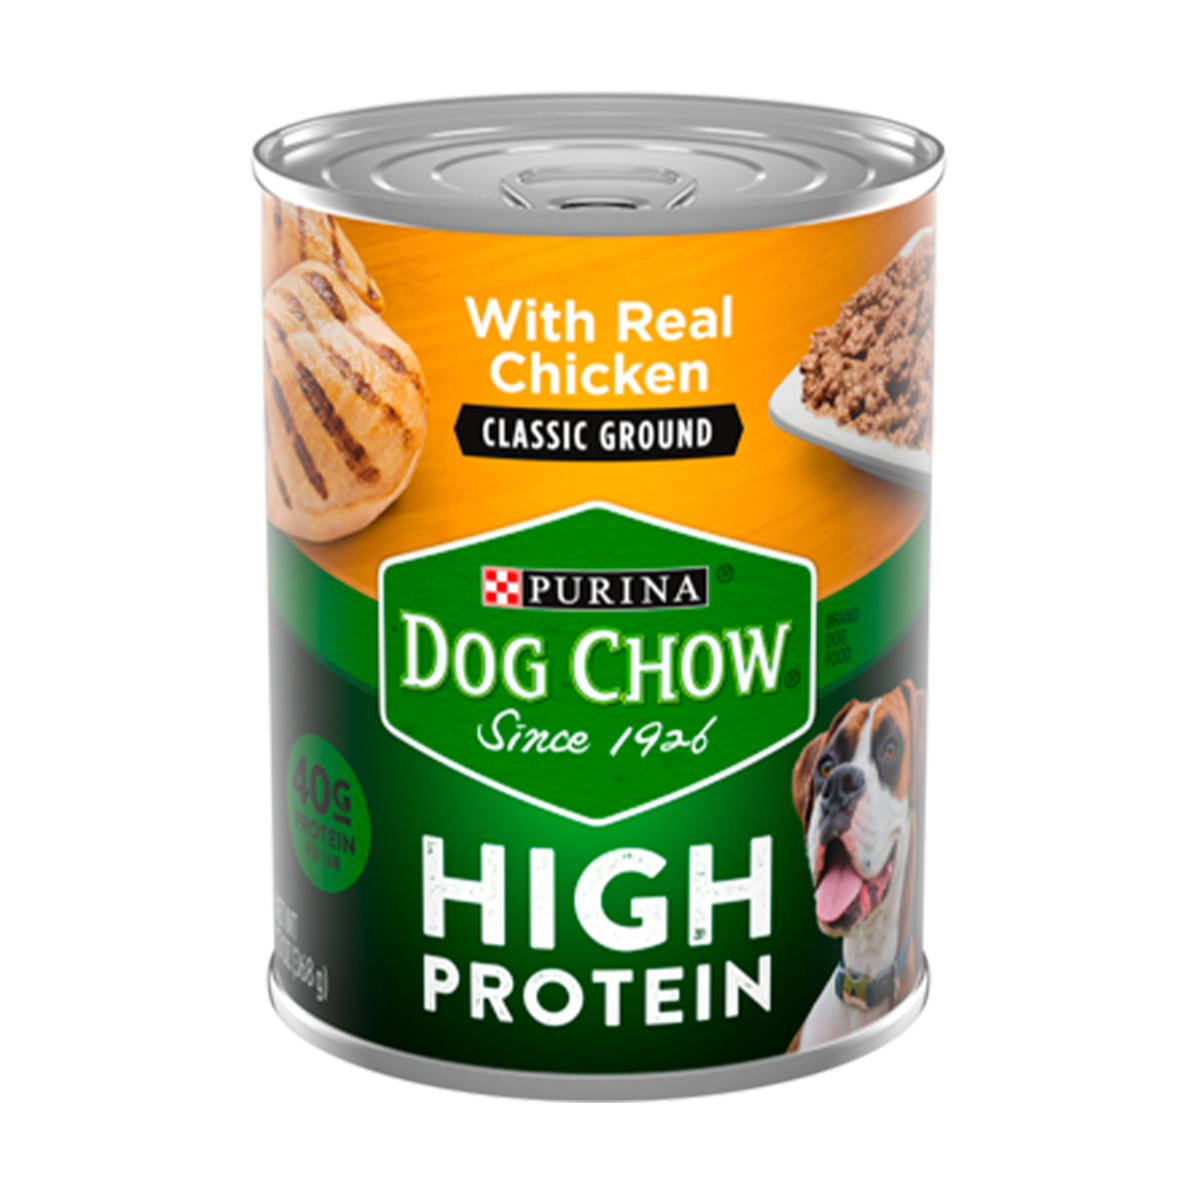 purina-dog-chow--high-protein-chicken-classic-ground.png